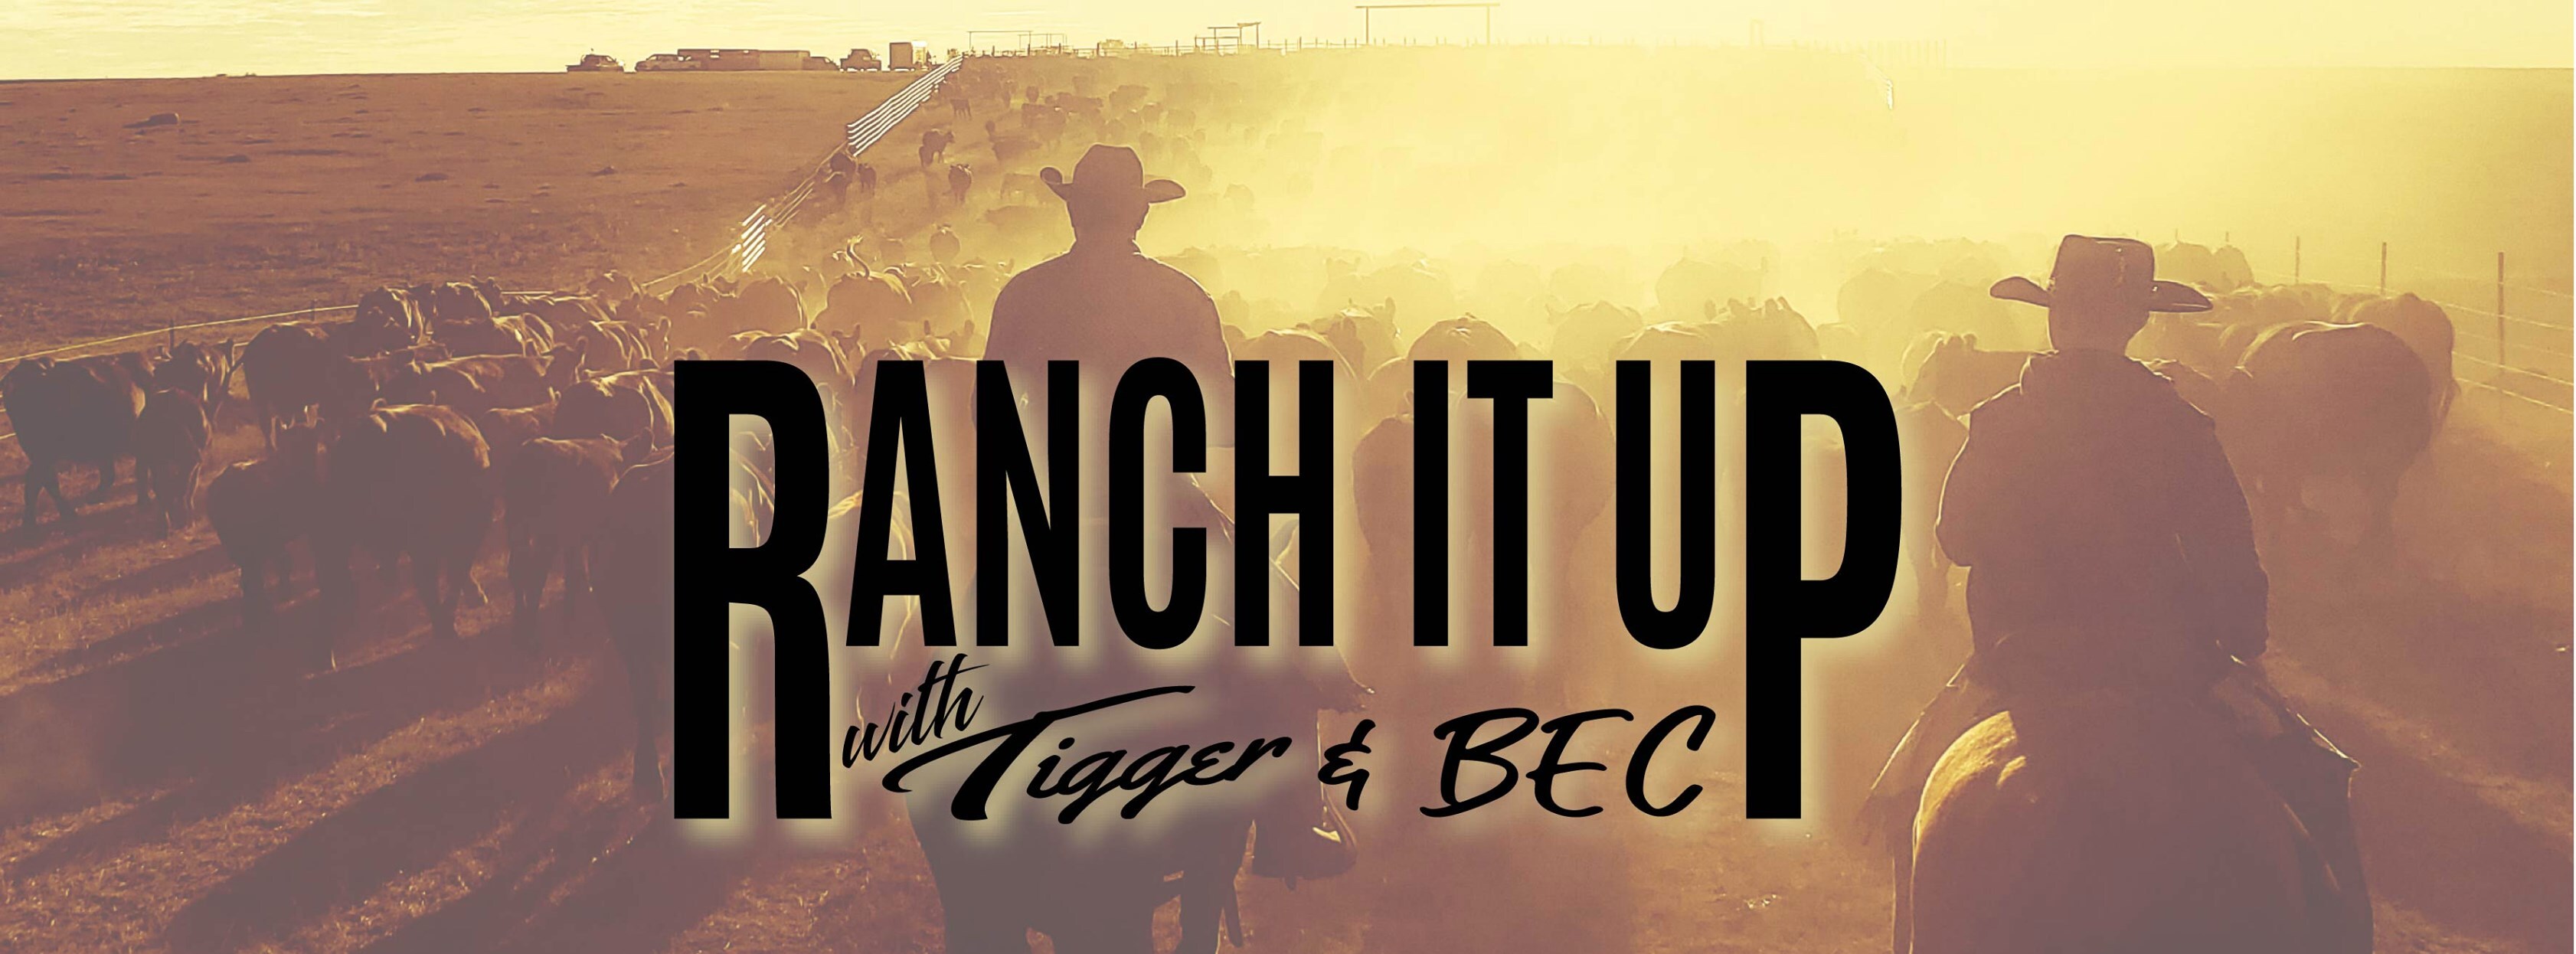 Ranch It Up